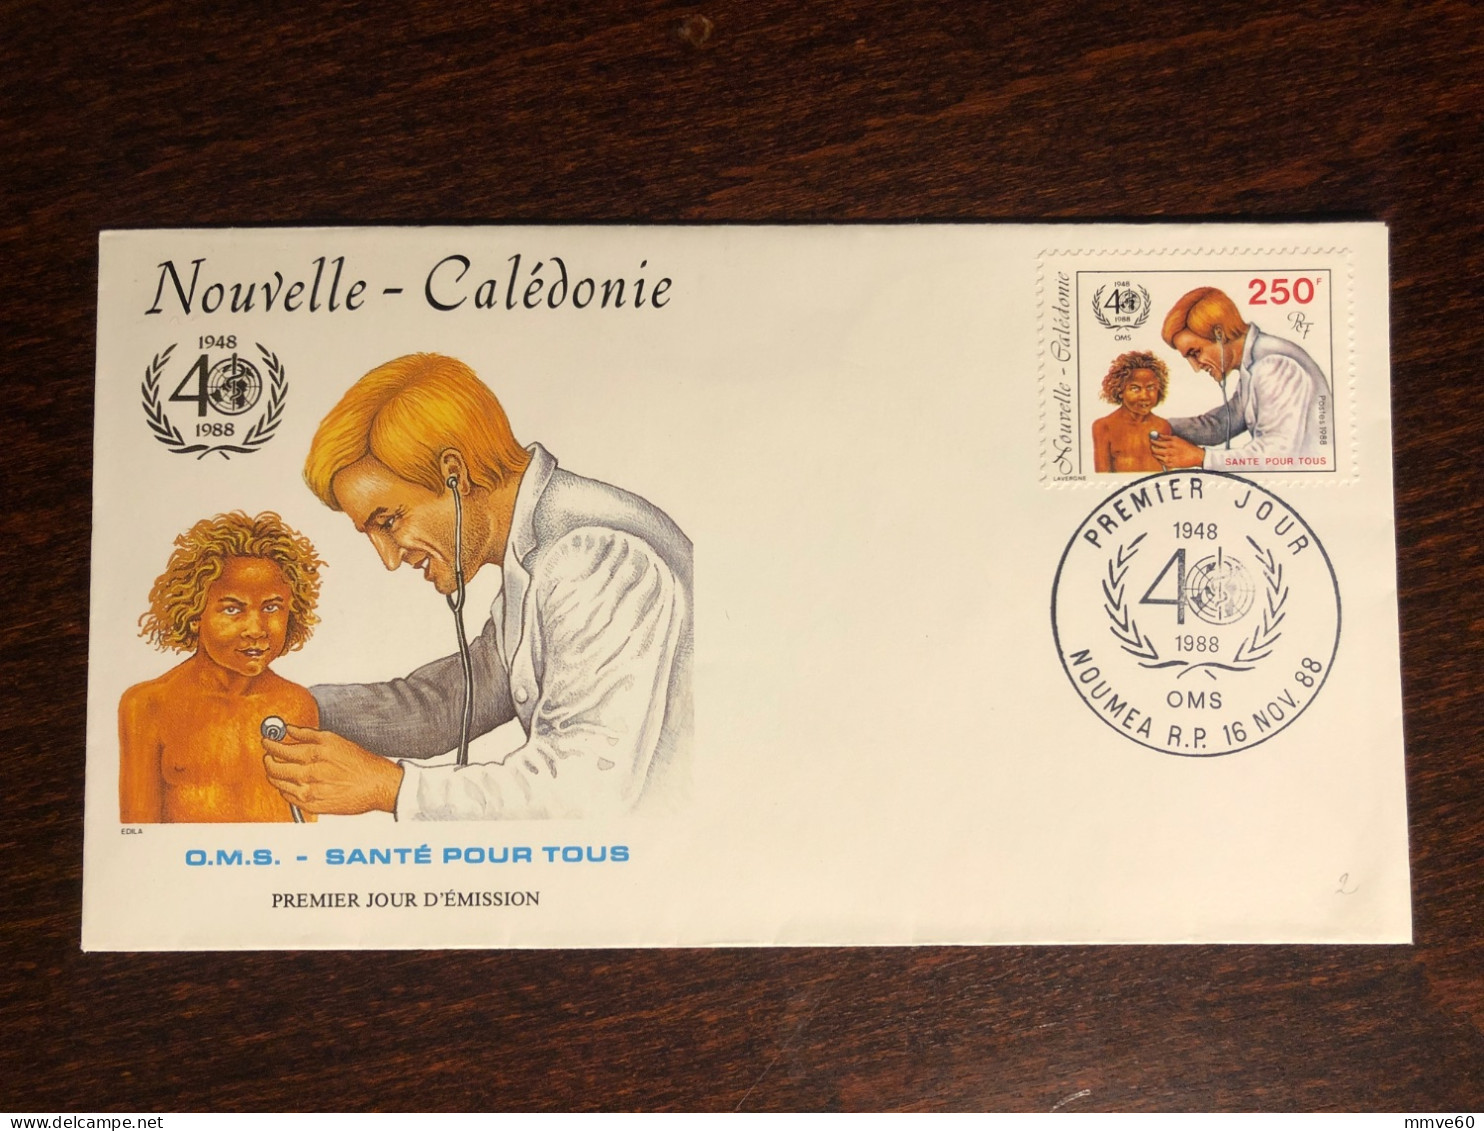 NEW CALEDONIA NOUVELLE CALEDONIE FDC COVER 1988 YEAR WHO HEALTH MEDICINE - Storia Postale